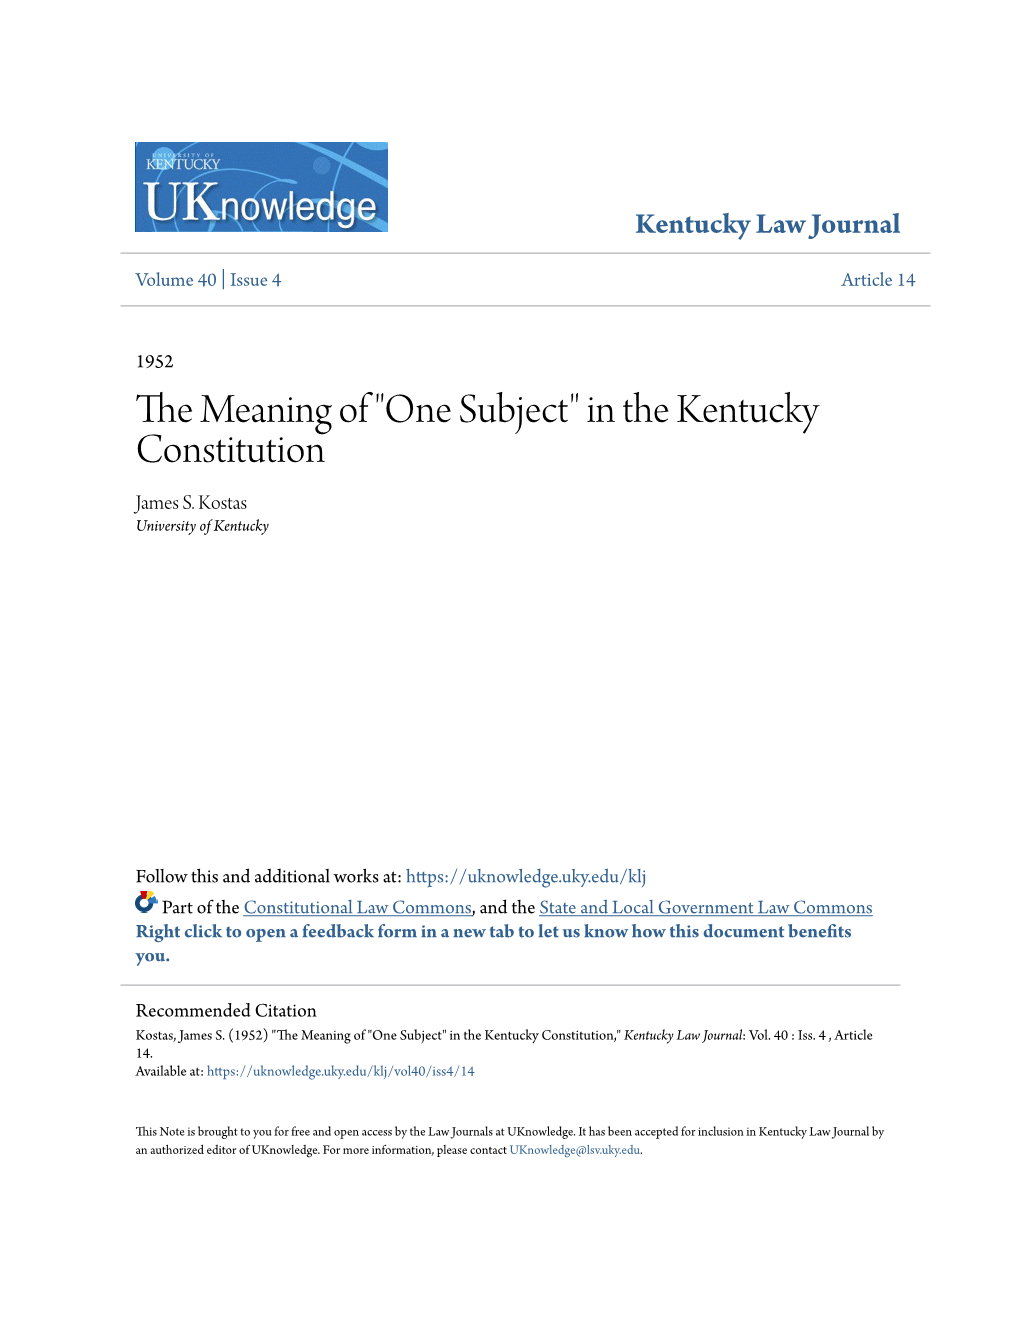 In the Kentucky Constitution James S